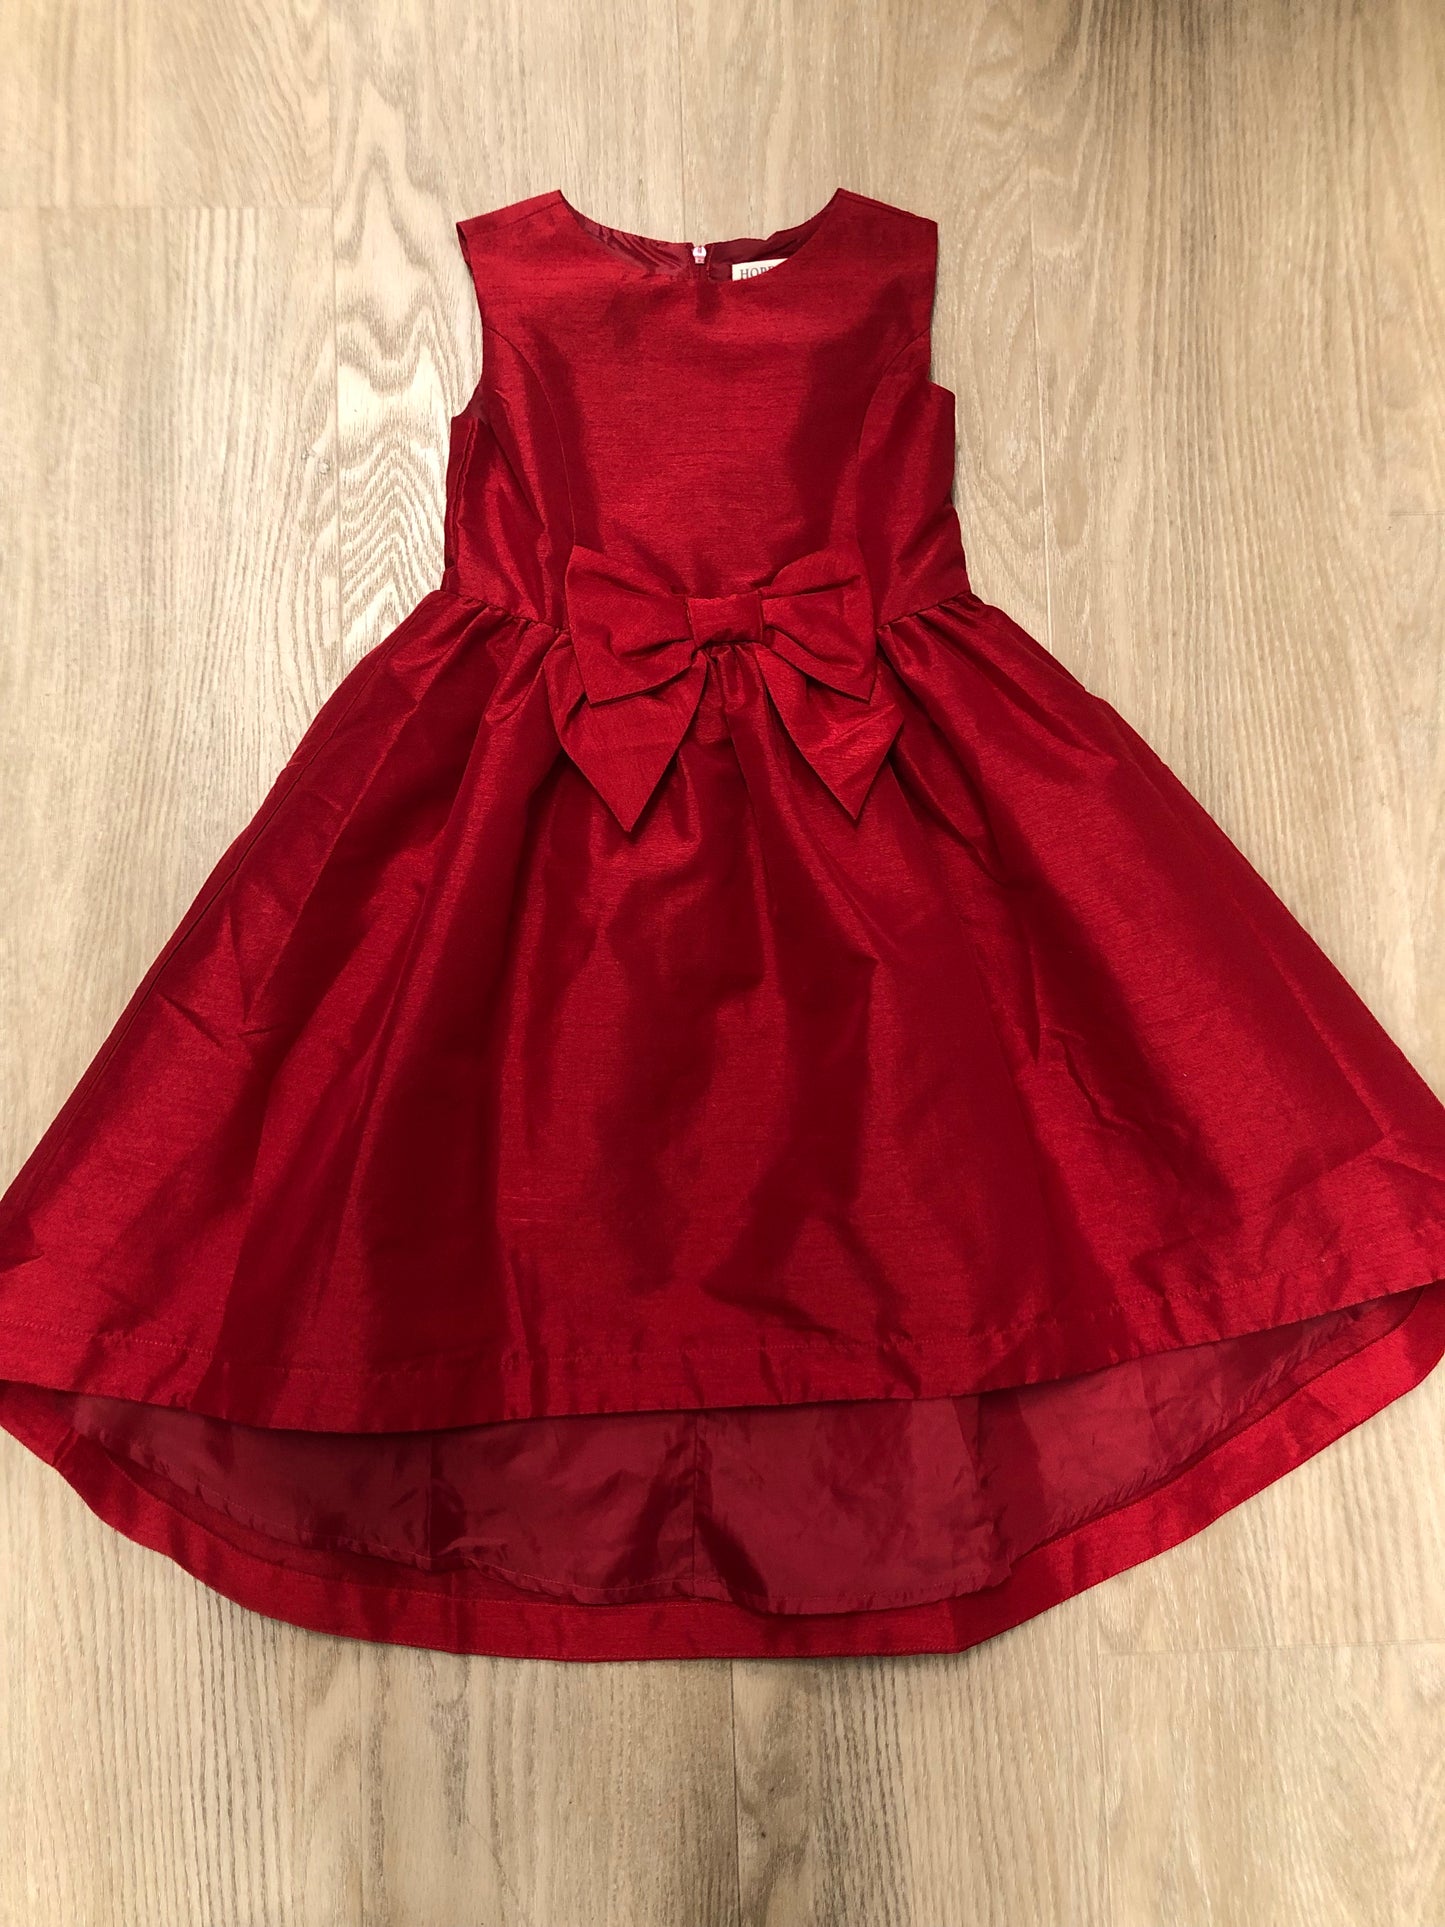 Hope & Henry Child Size 5 Red Dress